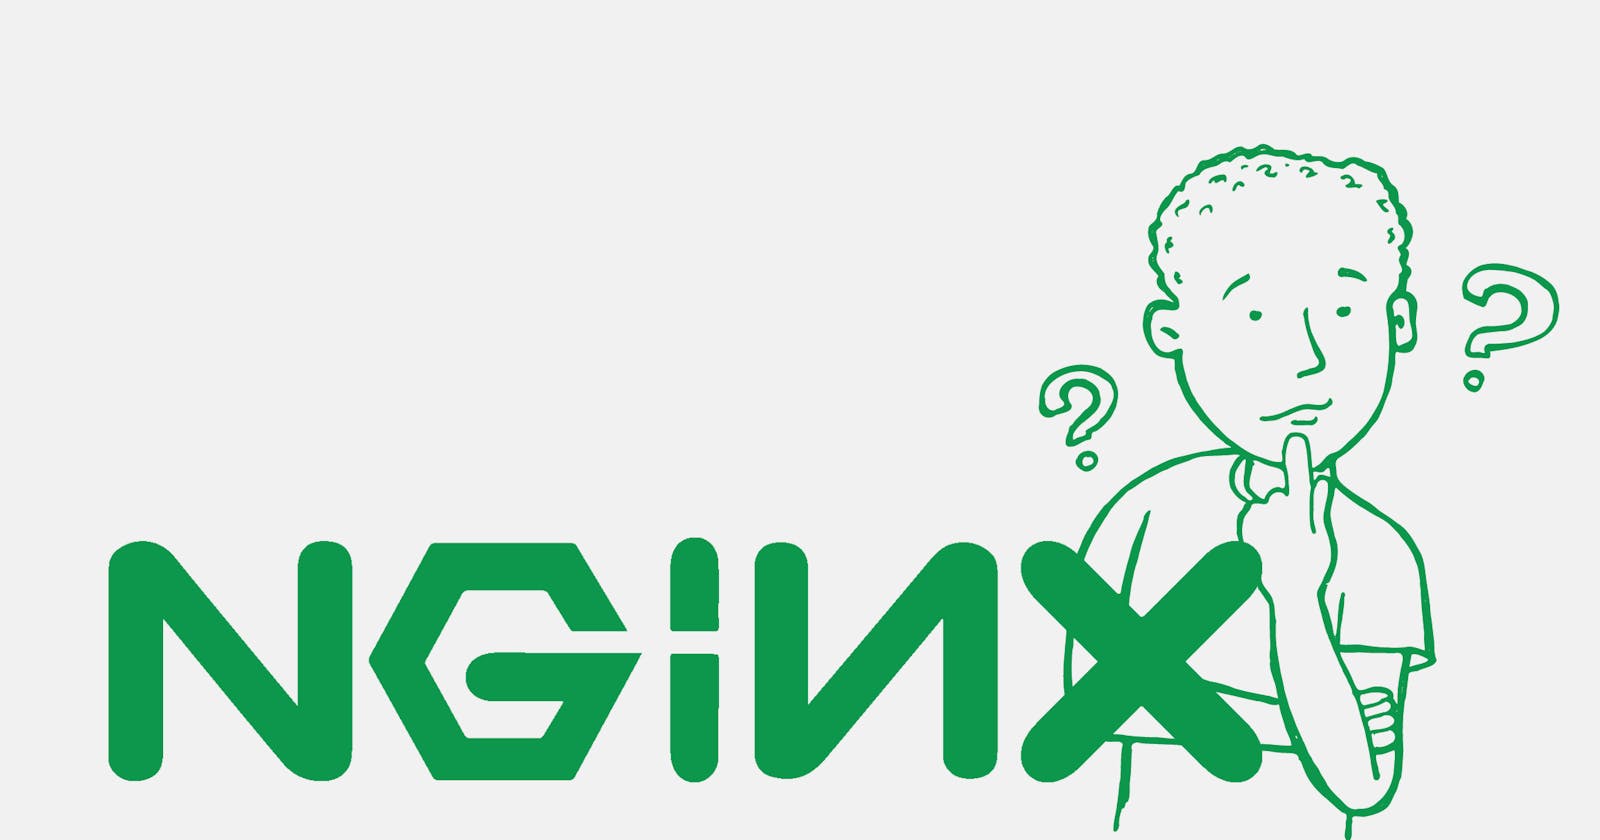 What is Nginx?